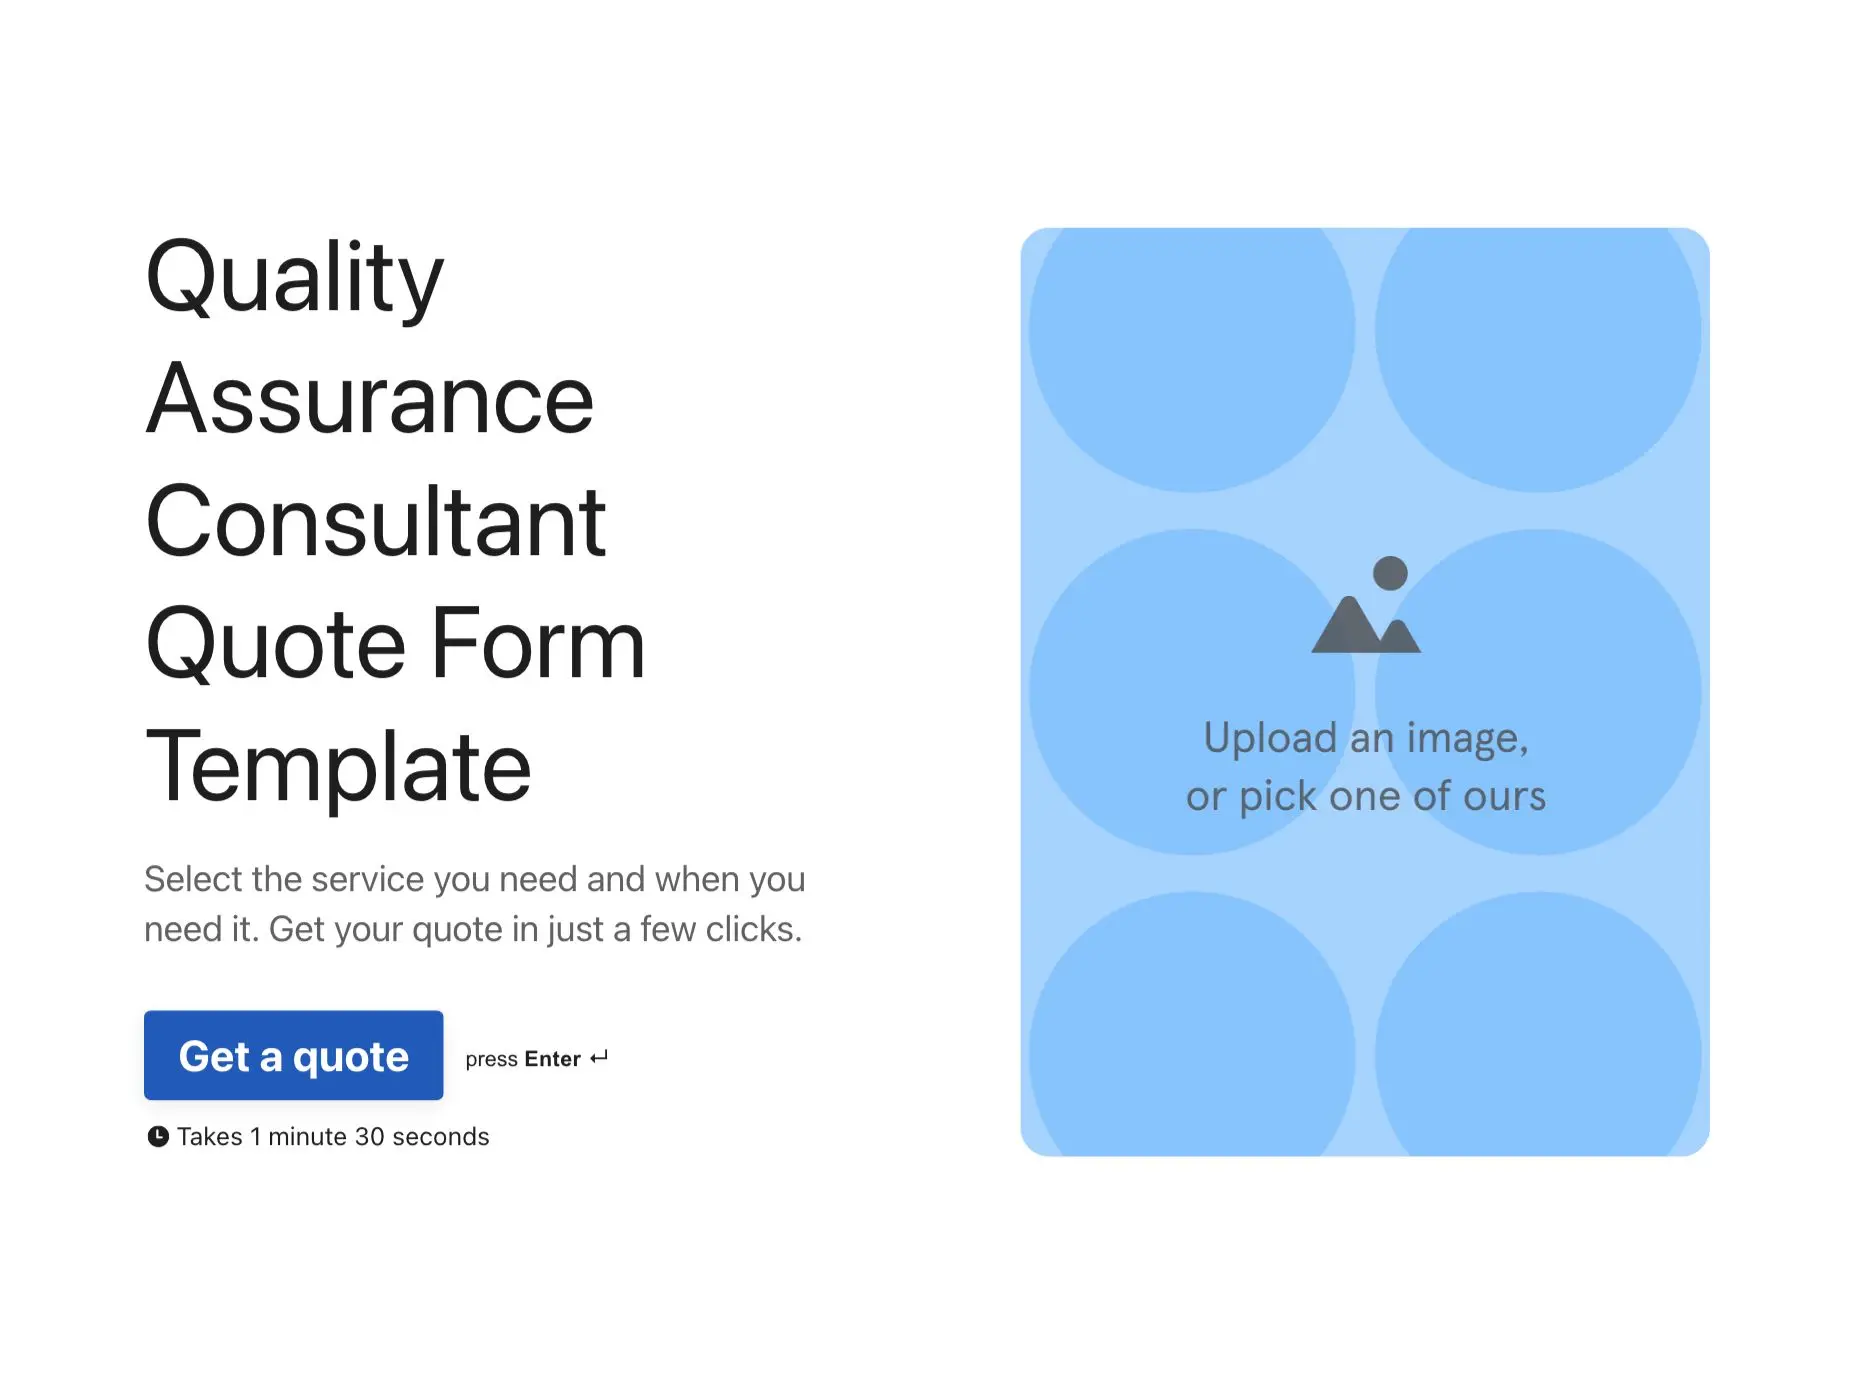 Quality Assurance Consultant Quote Form Template Hero